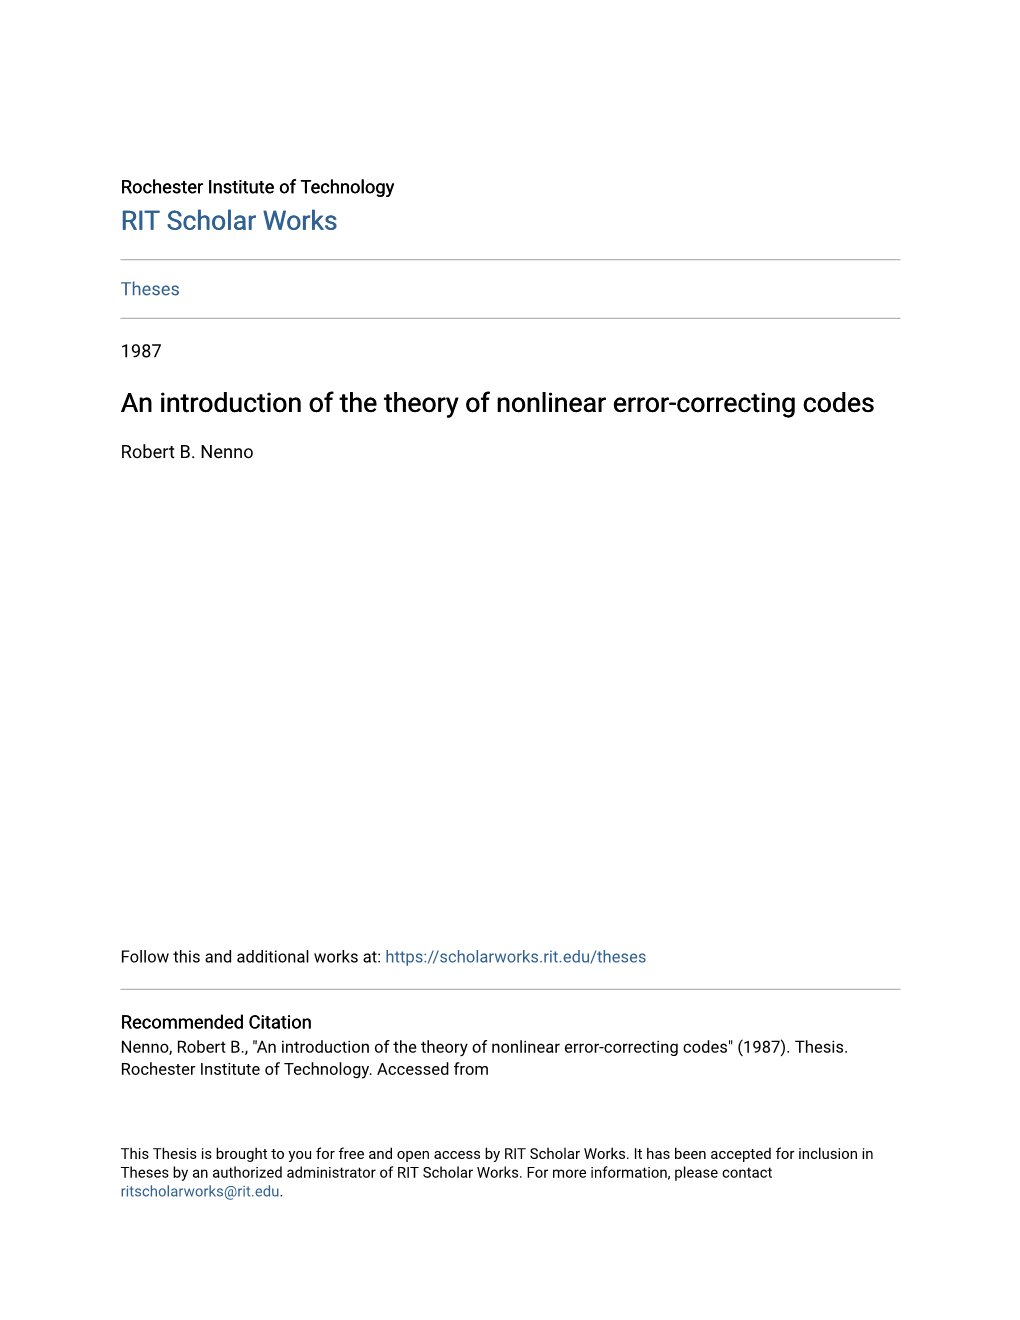 An Introduction of the Theory of Nonlinear Error-Correcting Codes